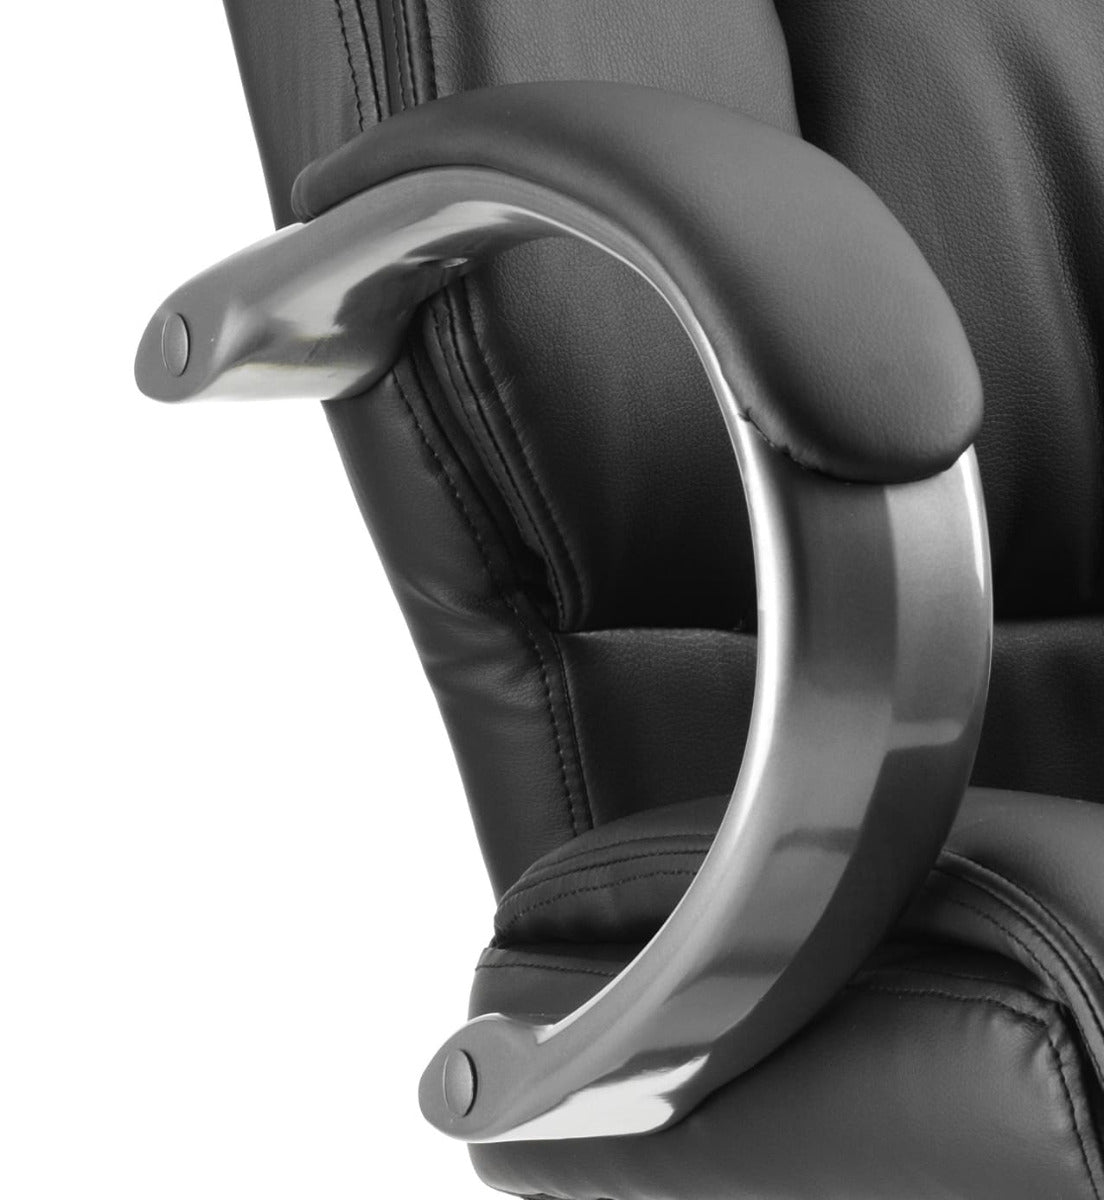 Galloway Black Bonded Leather Cantilever Office Chair